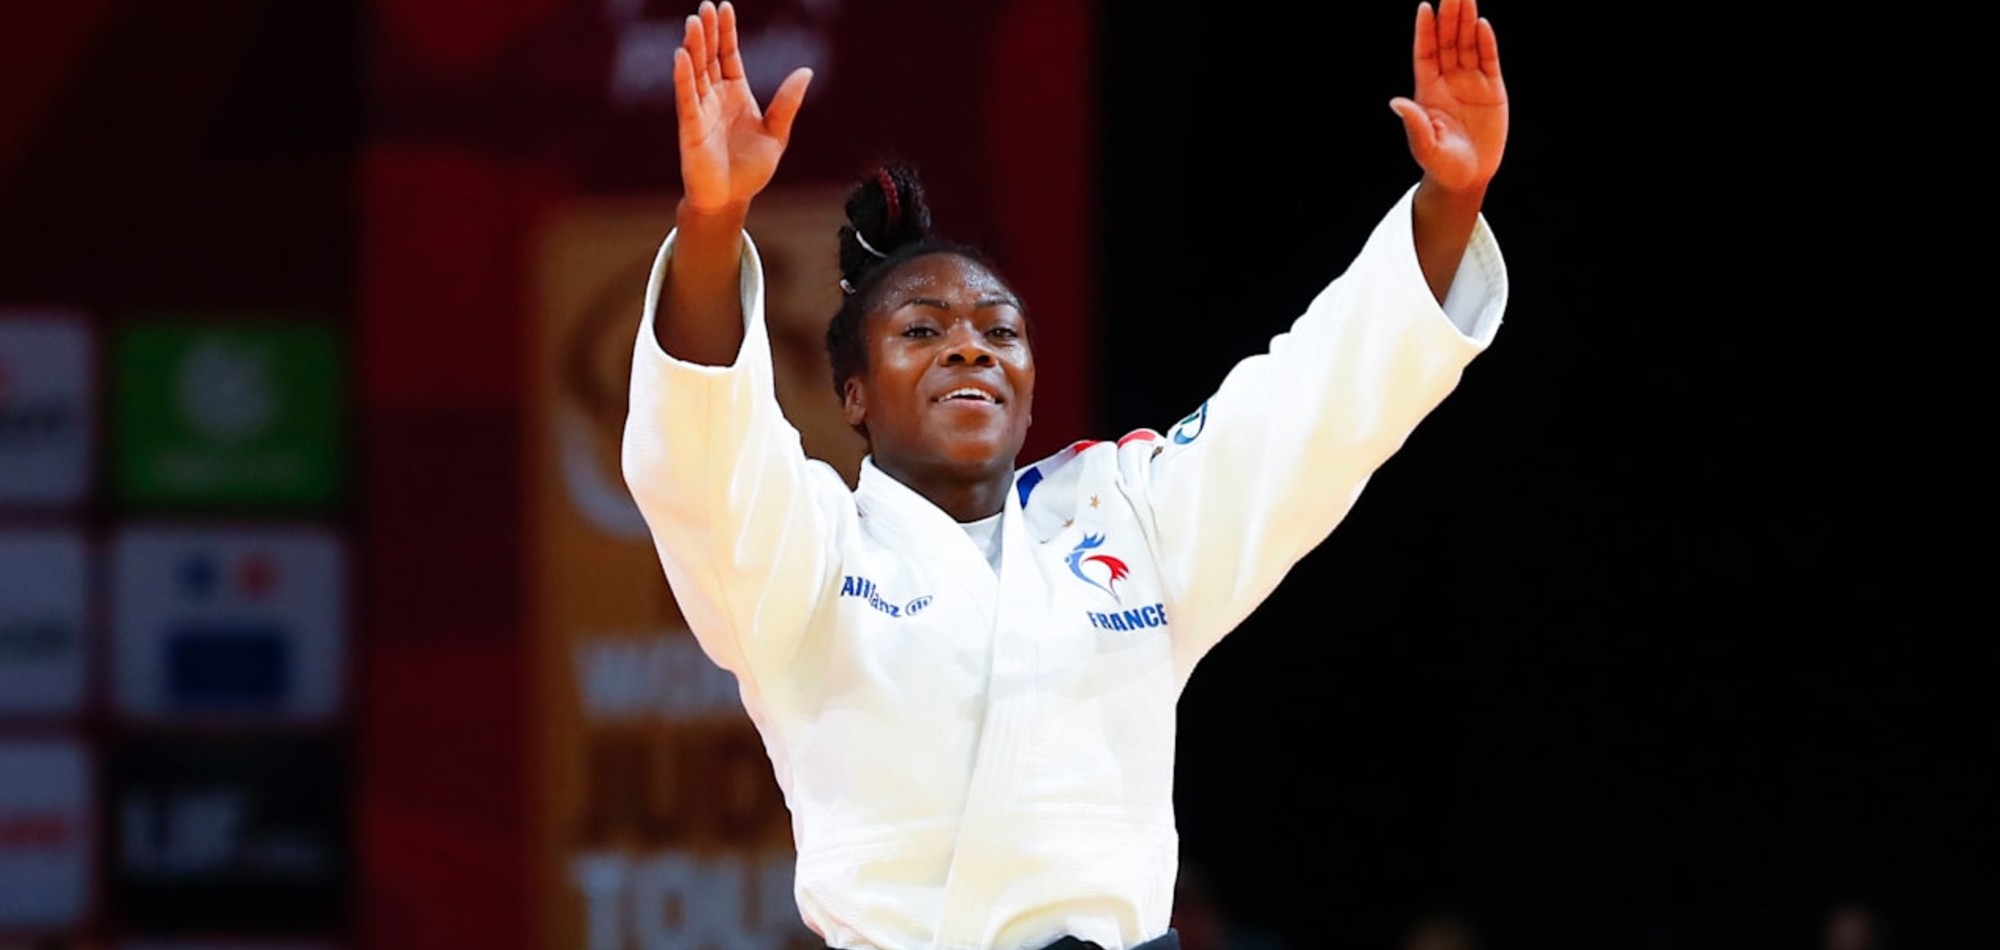 Agbegnenou secures gold for France at Doha Judo Masters 2021